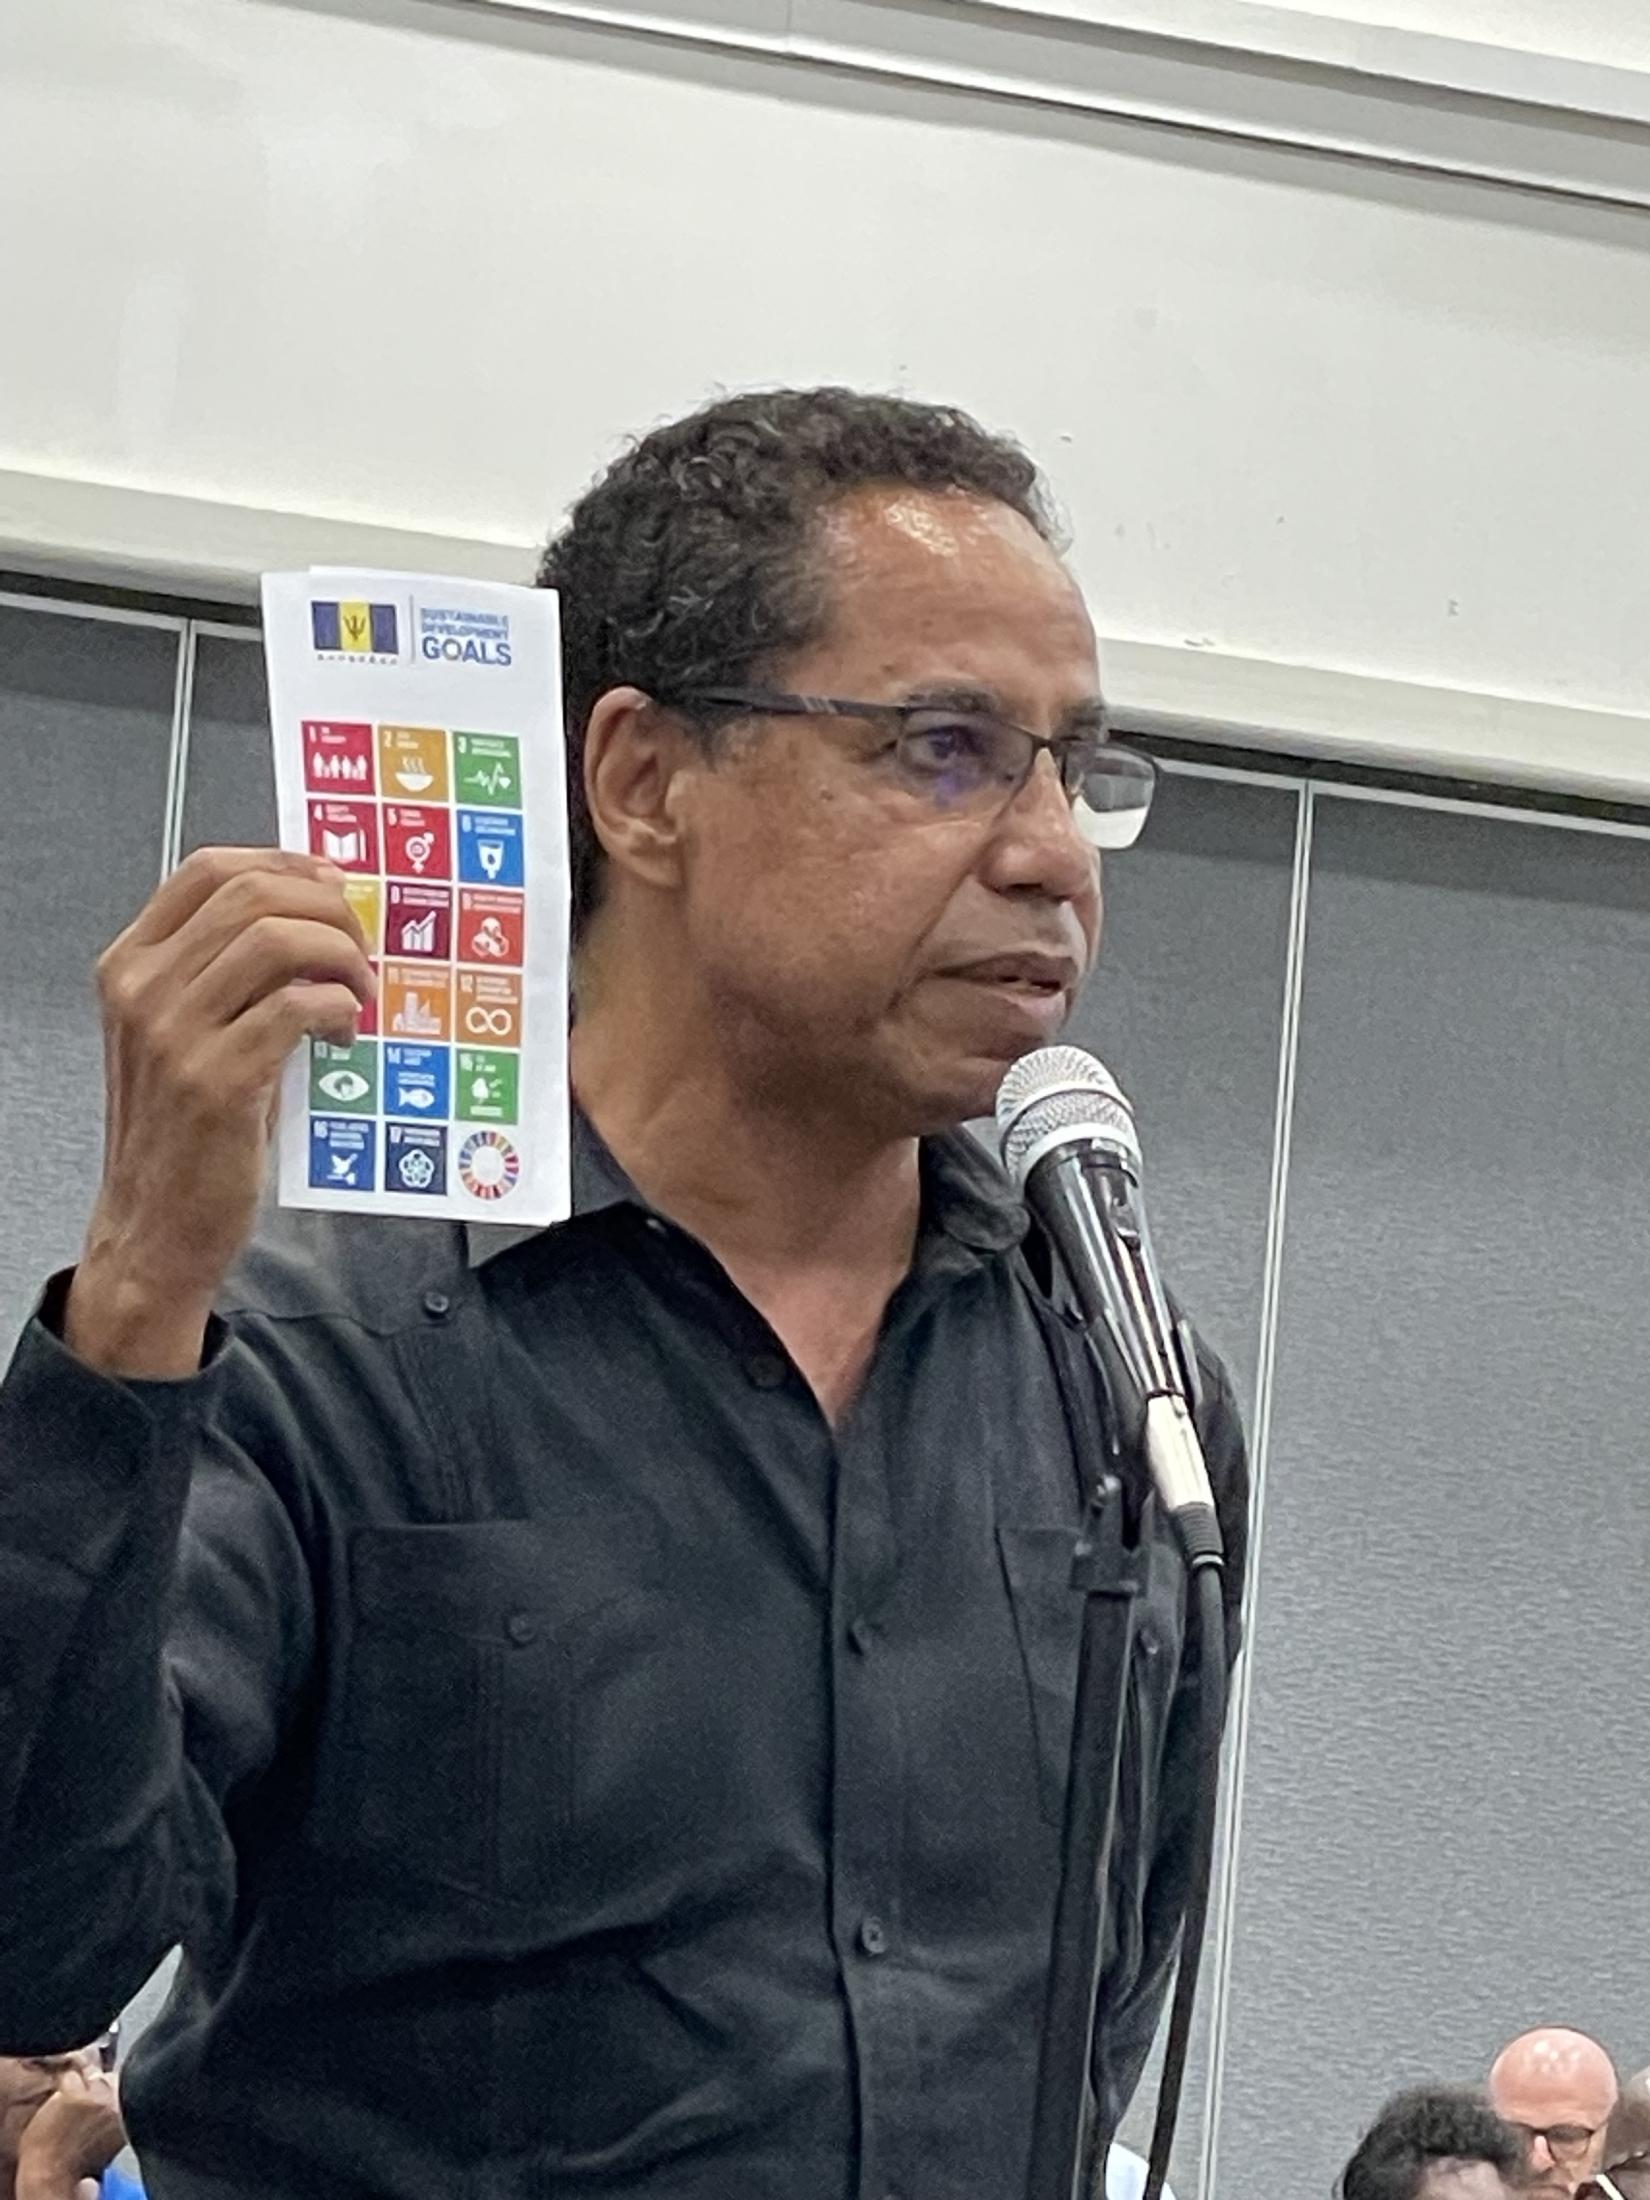 Man standing in audience at a microphone on a stand holding up a sheet of the Sustainable Development Goals